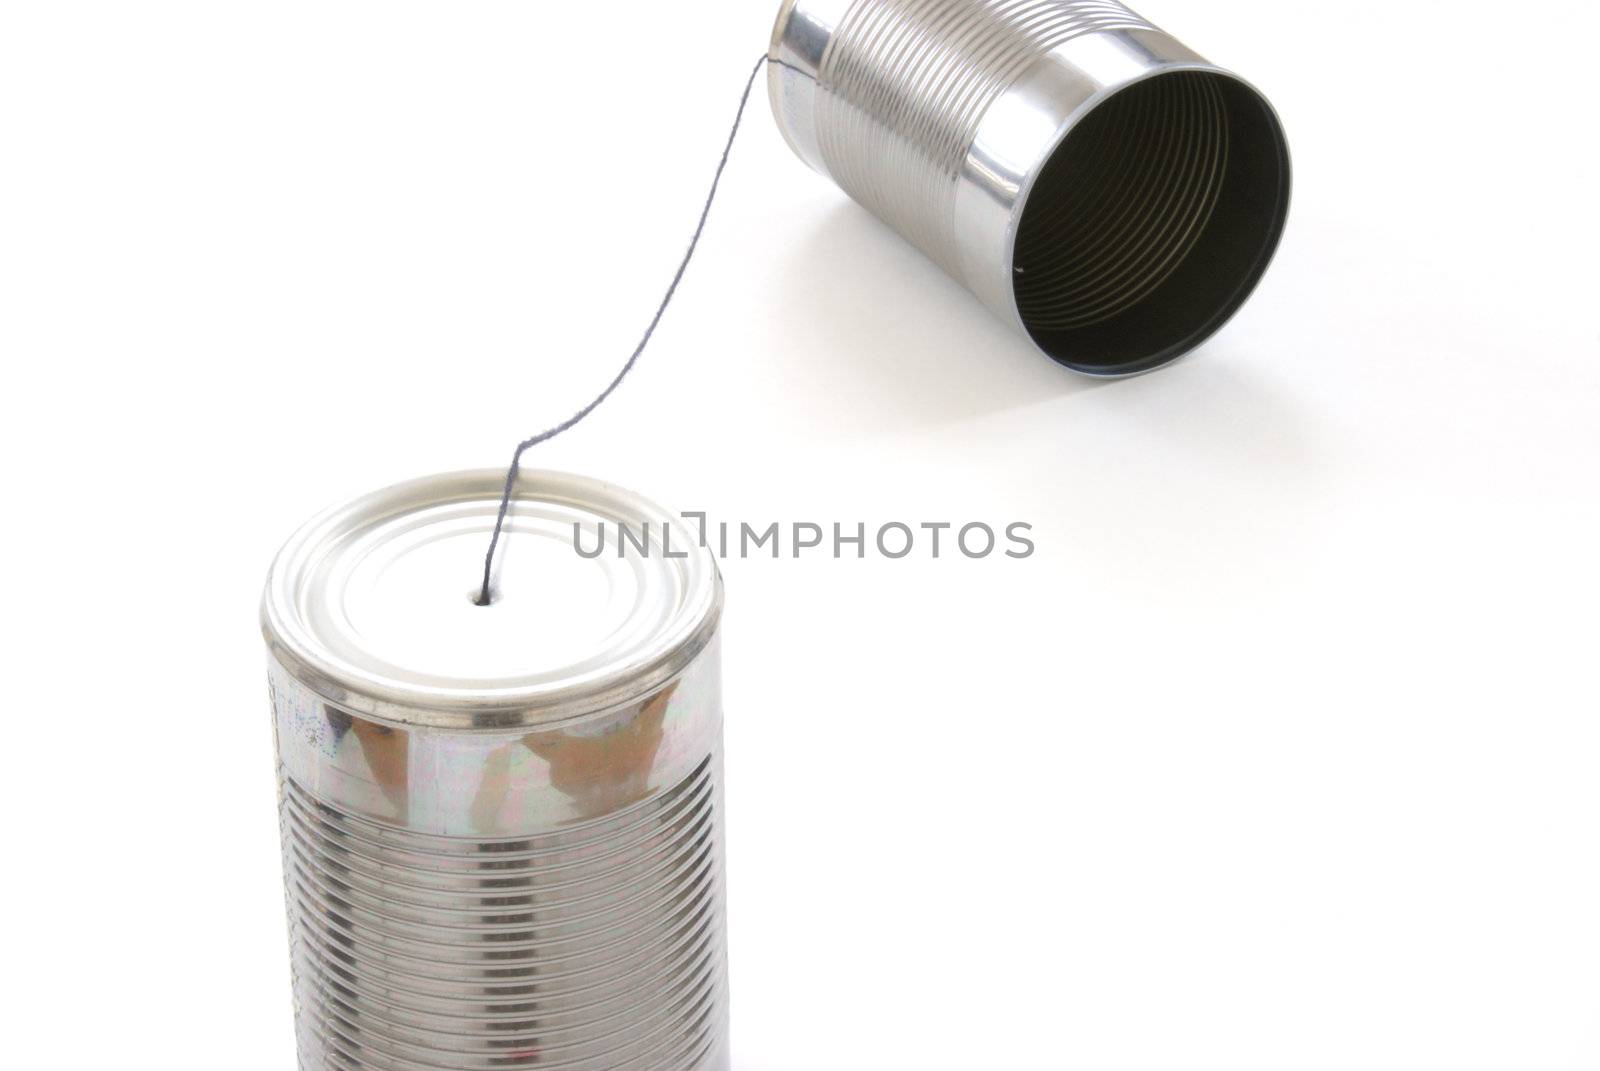 A homemade toy telephone out of tin cans and a string.